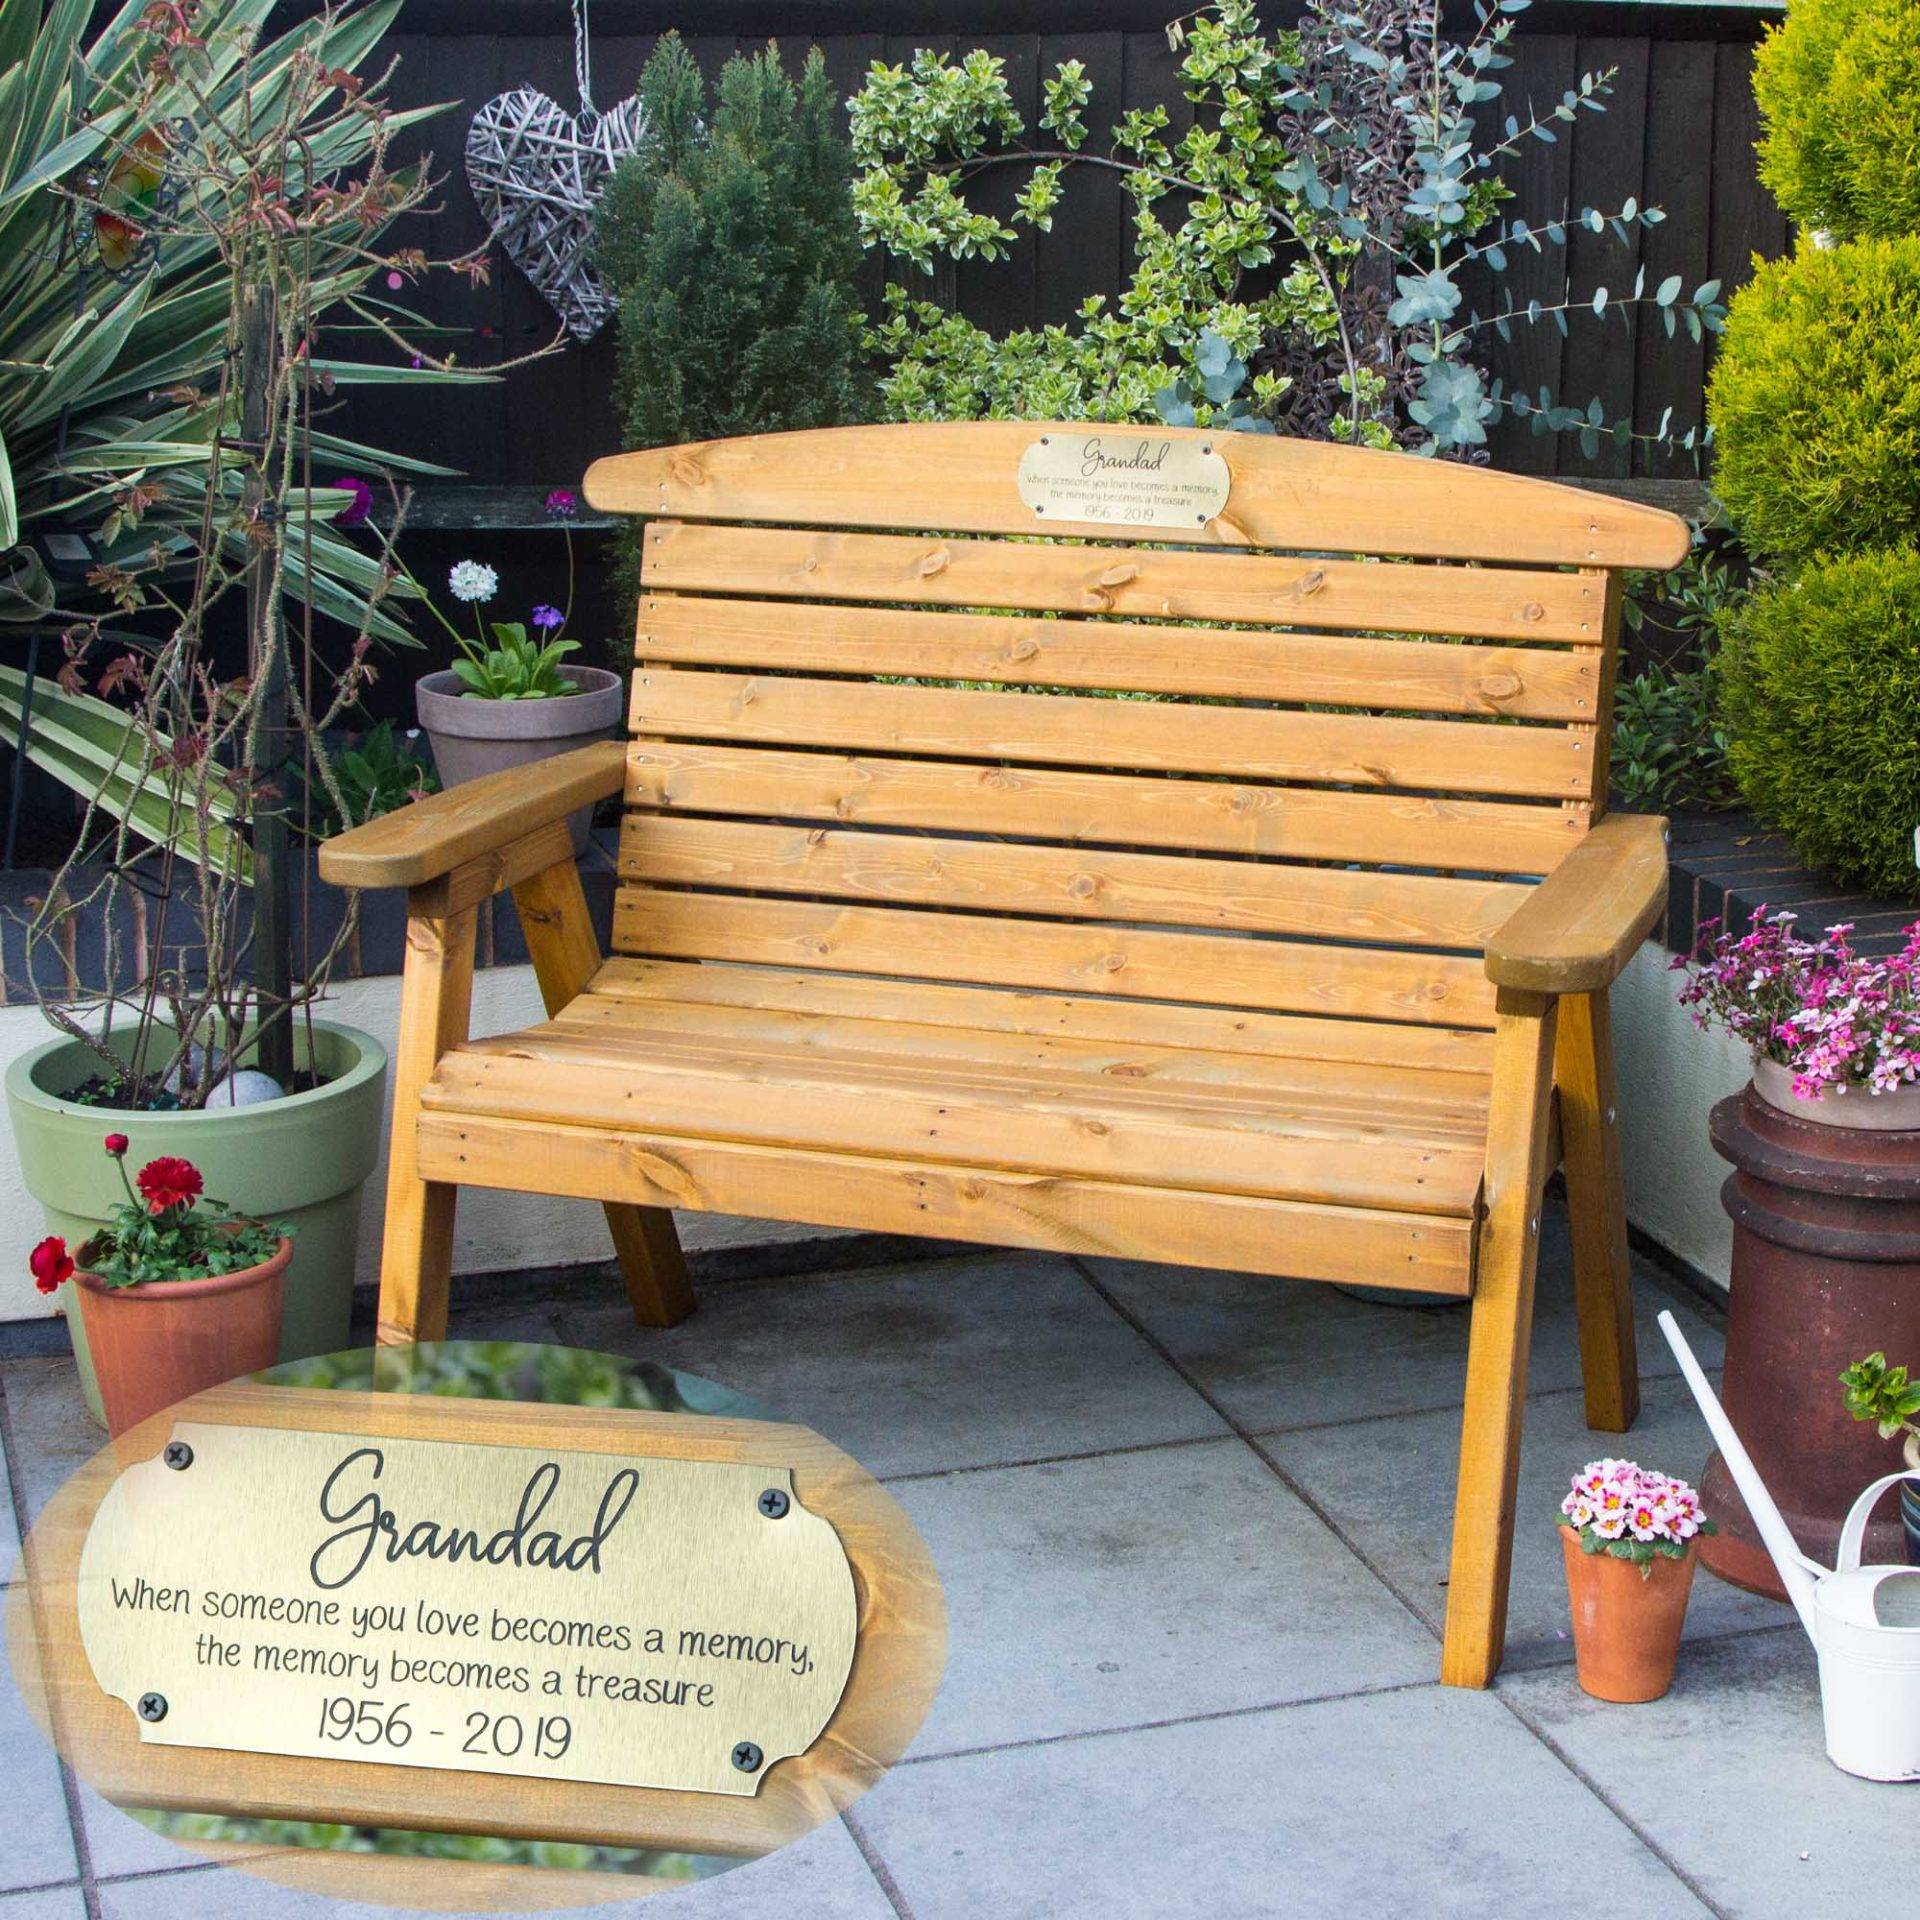 Patio Ideas Decorative Outdoor Cozy Benches Bench Inspirations Product